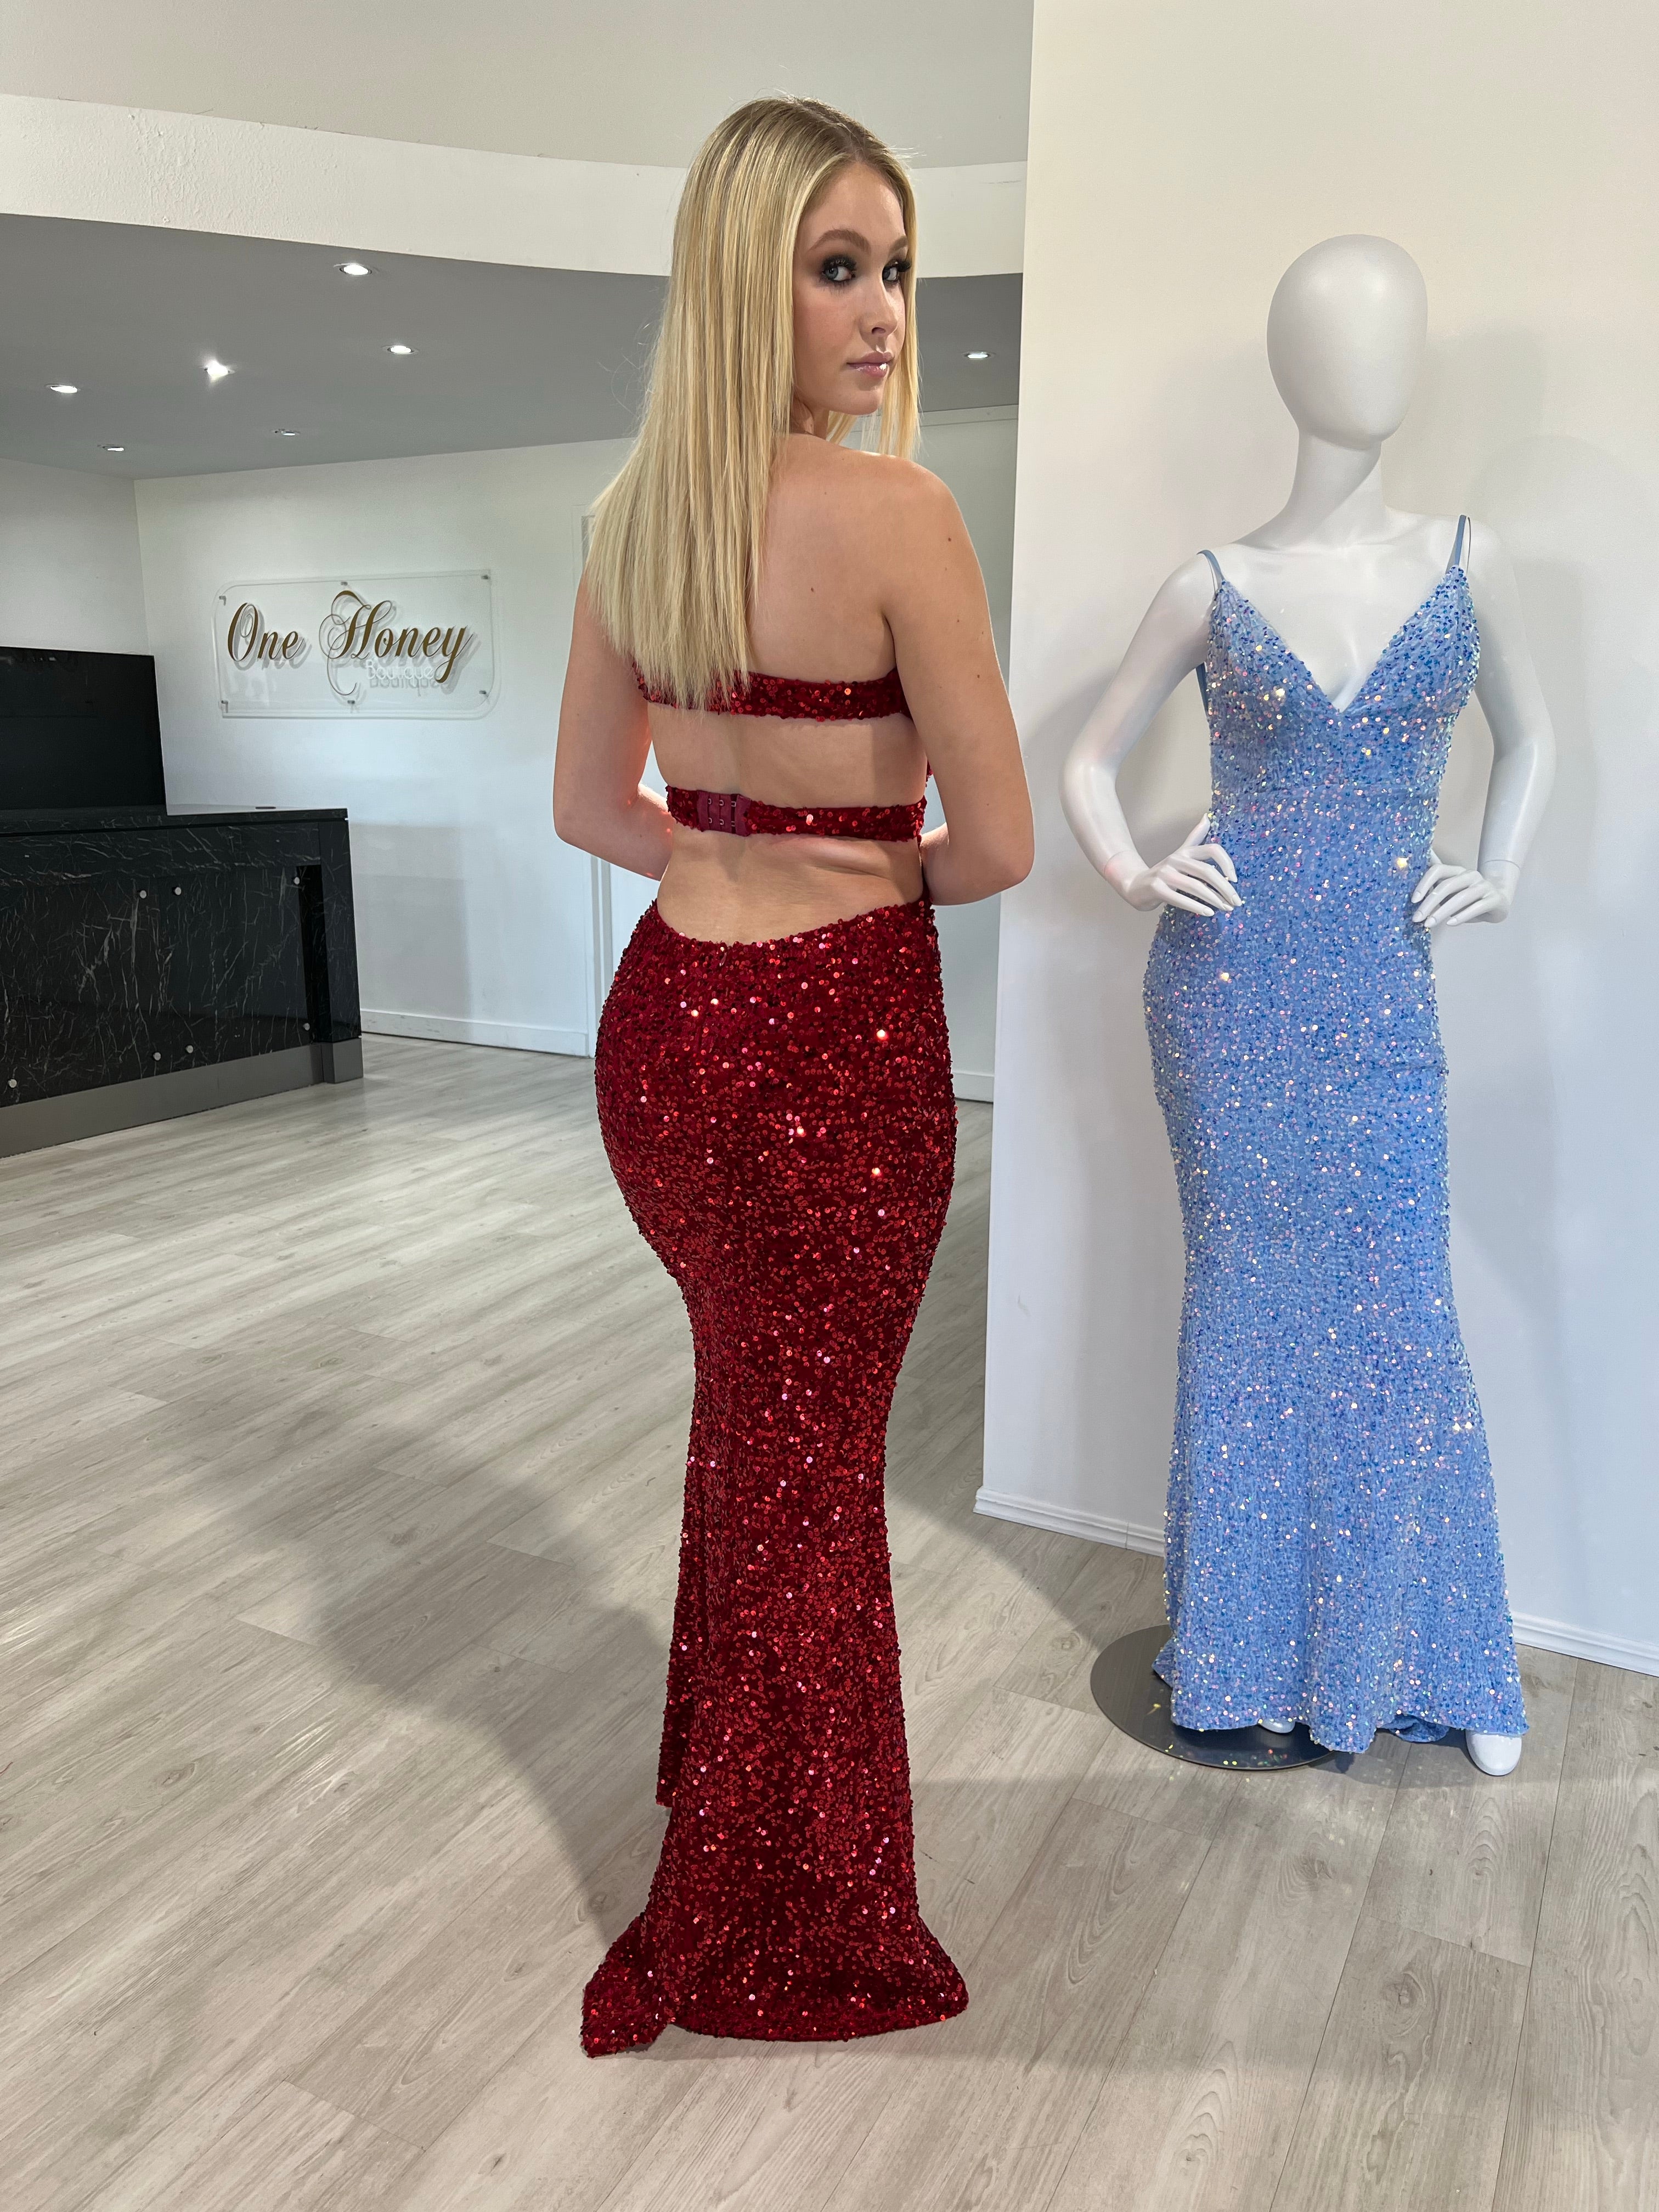 Honey Couture DENISE Red Sequin Cut Out Strapless Mermaid Evening Dress